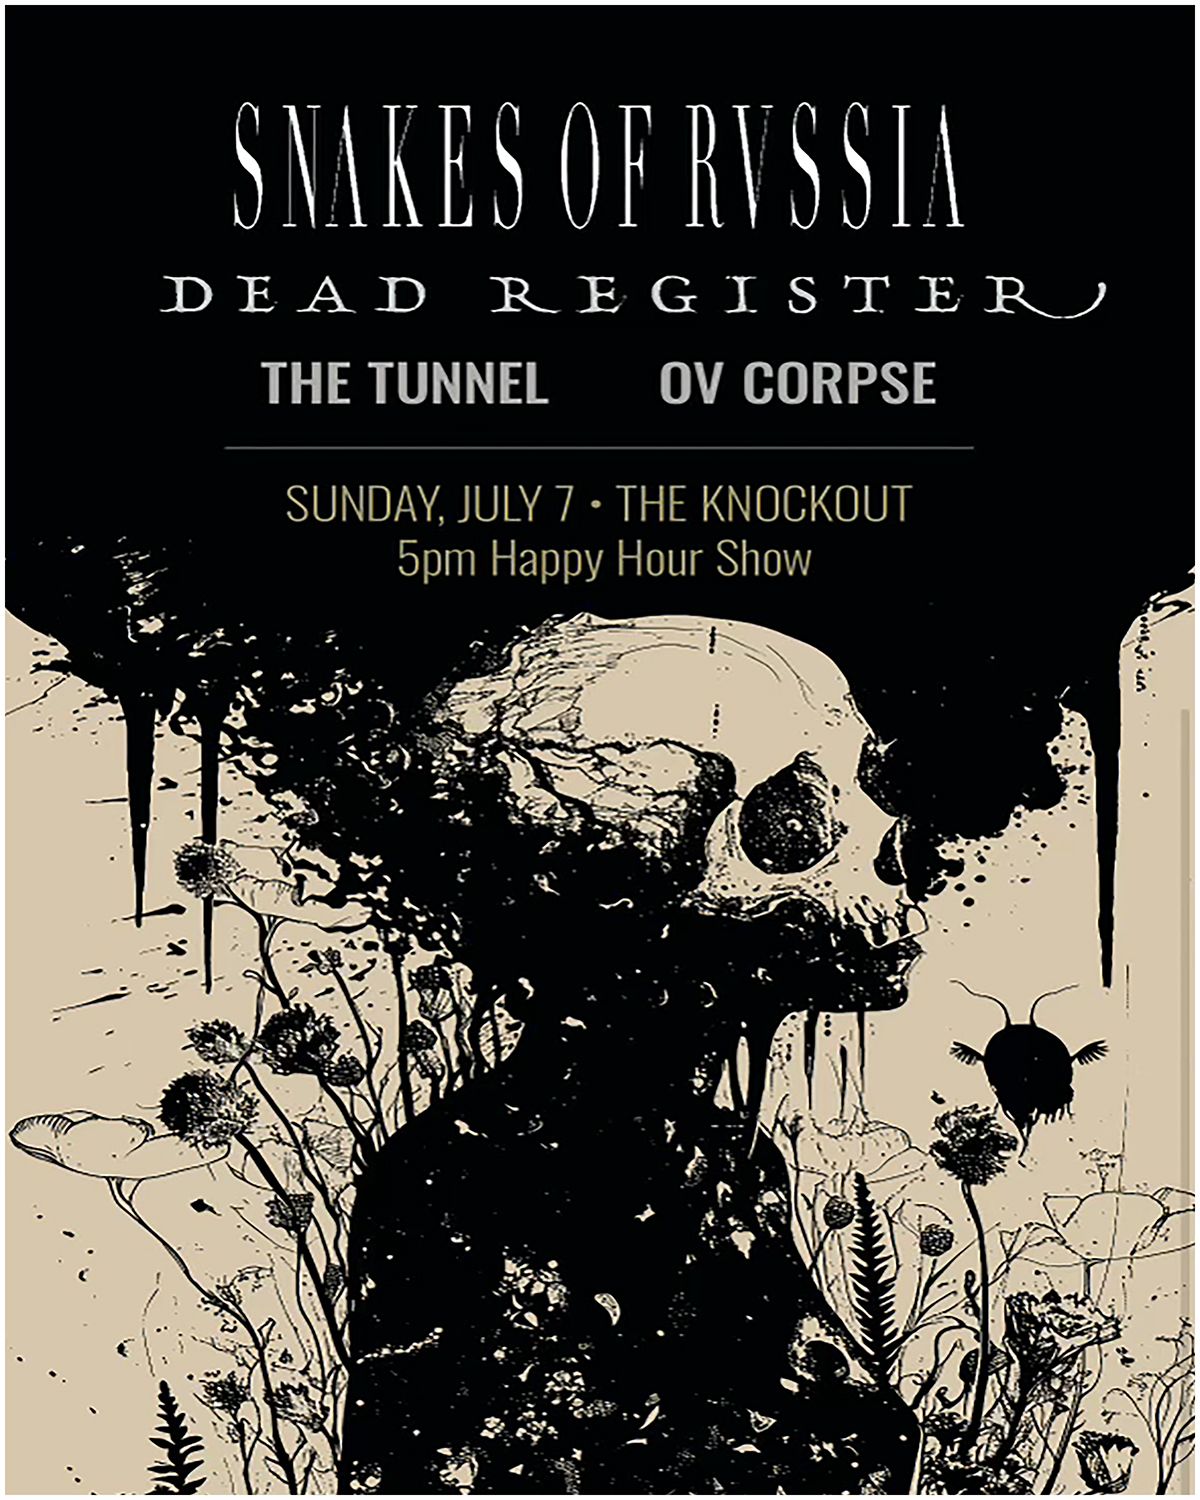 Snakes of Russia + Dead Register + The Tunnel + Ov Corpse (Death Valley High solo) @ The Knockout